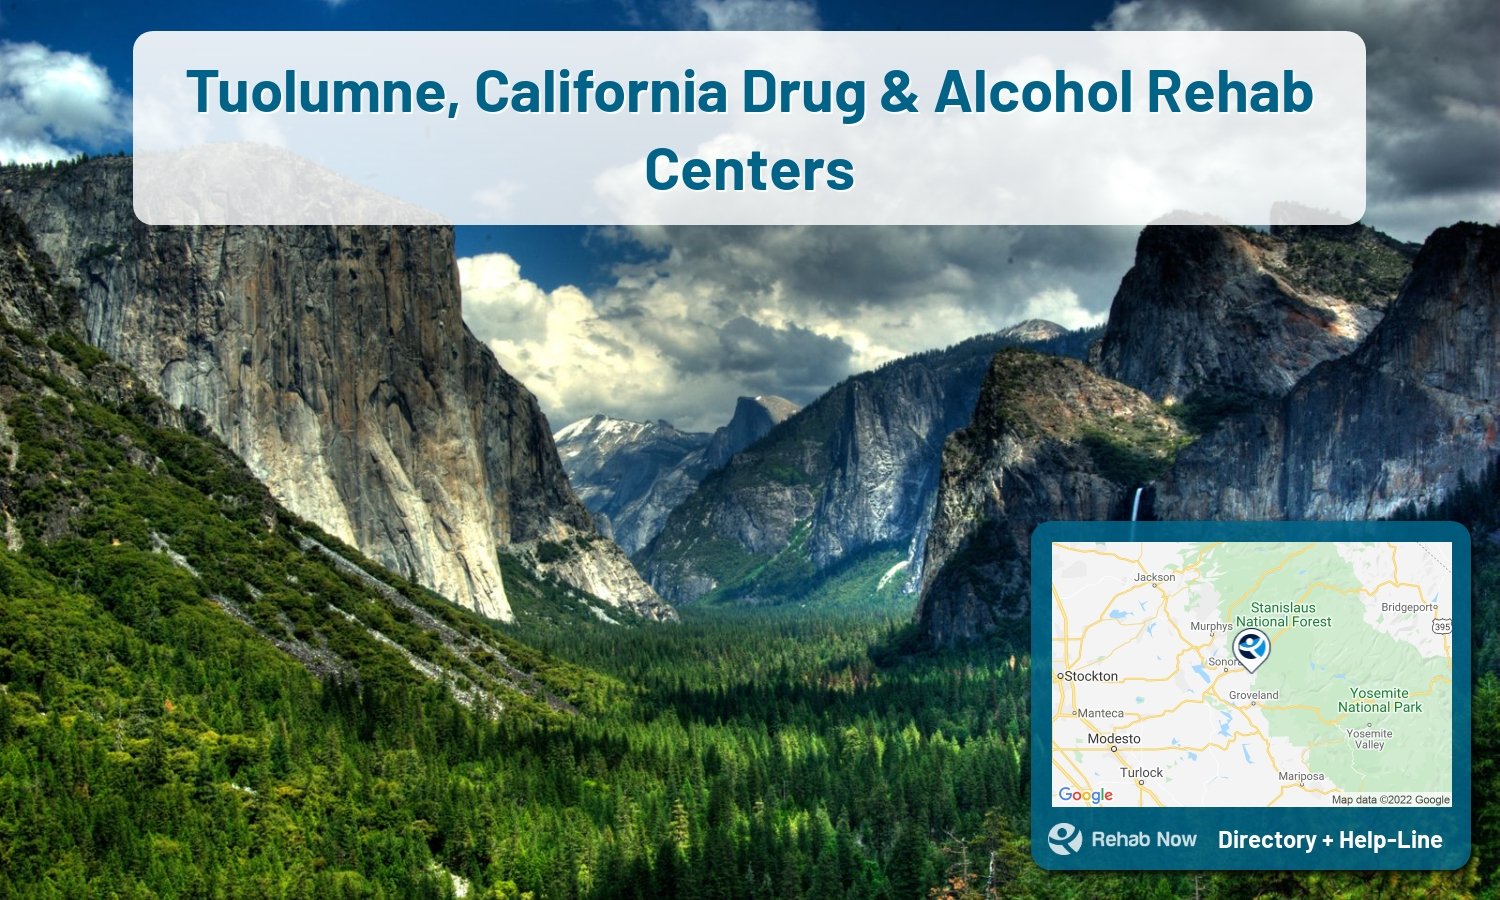 Drug rehab and alcohol treatment services near you in Tuolumne, California. Need help choosing a center? Call us, free.